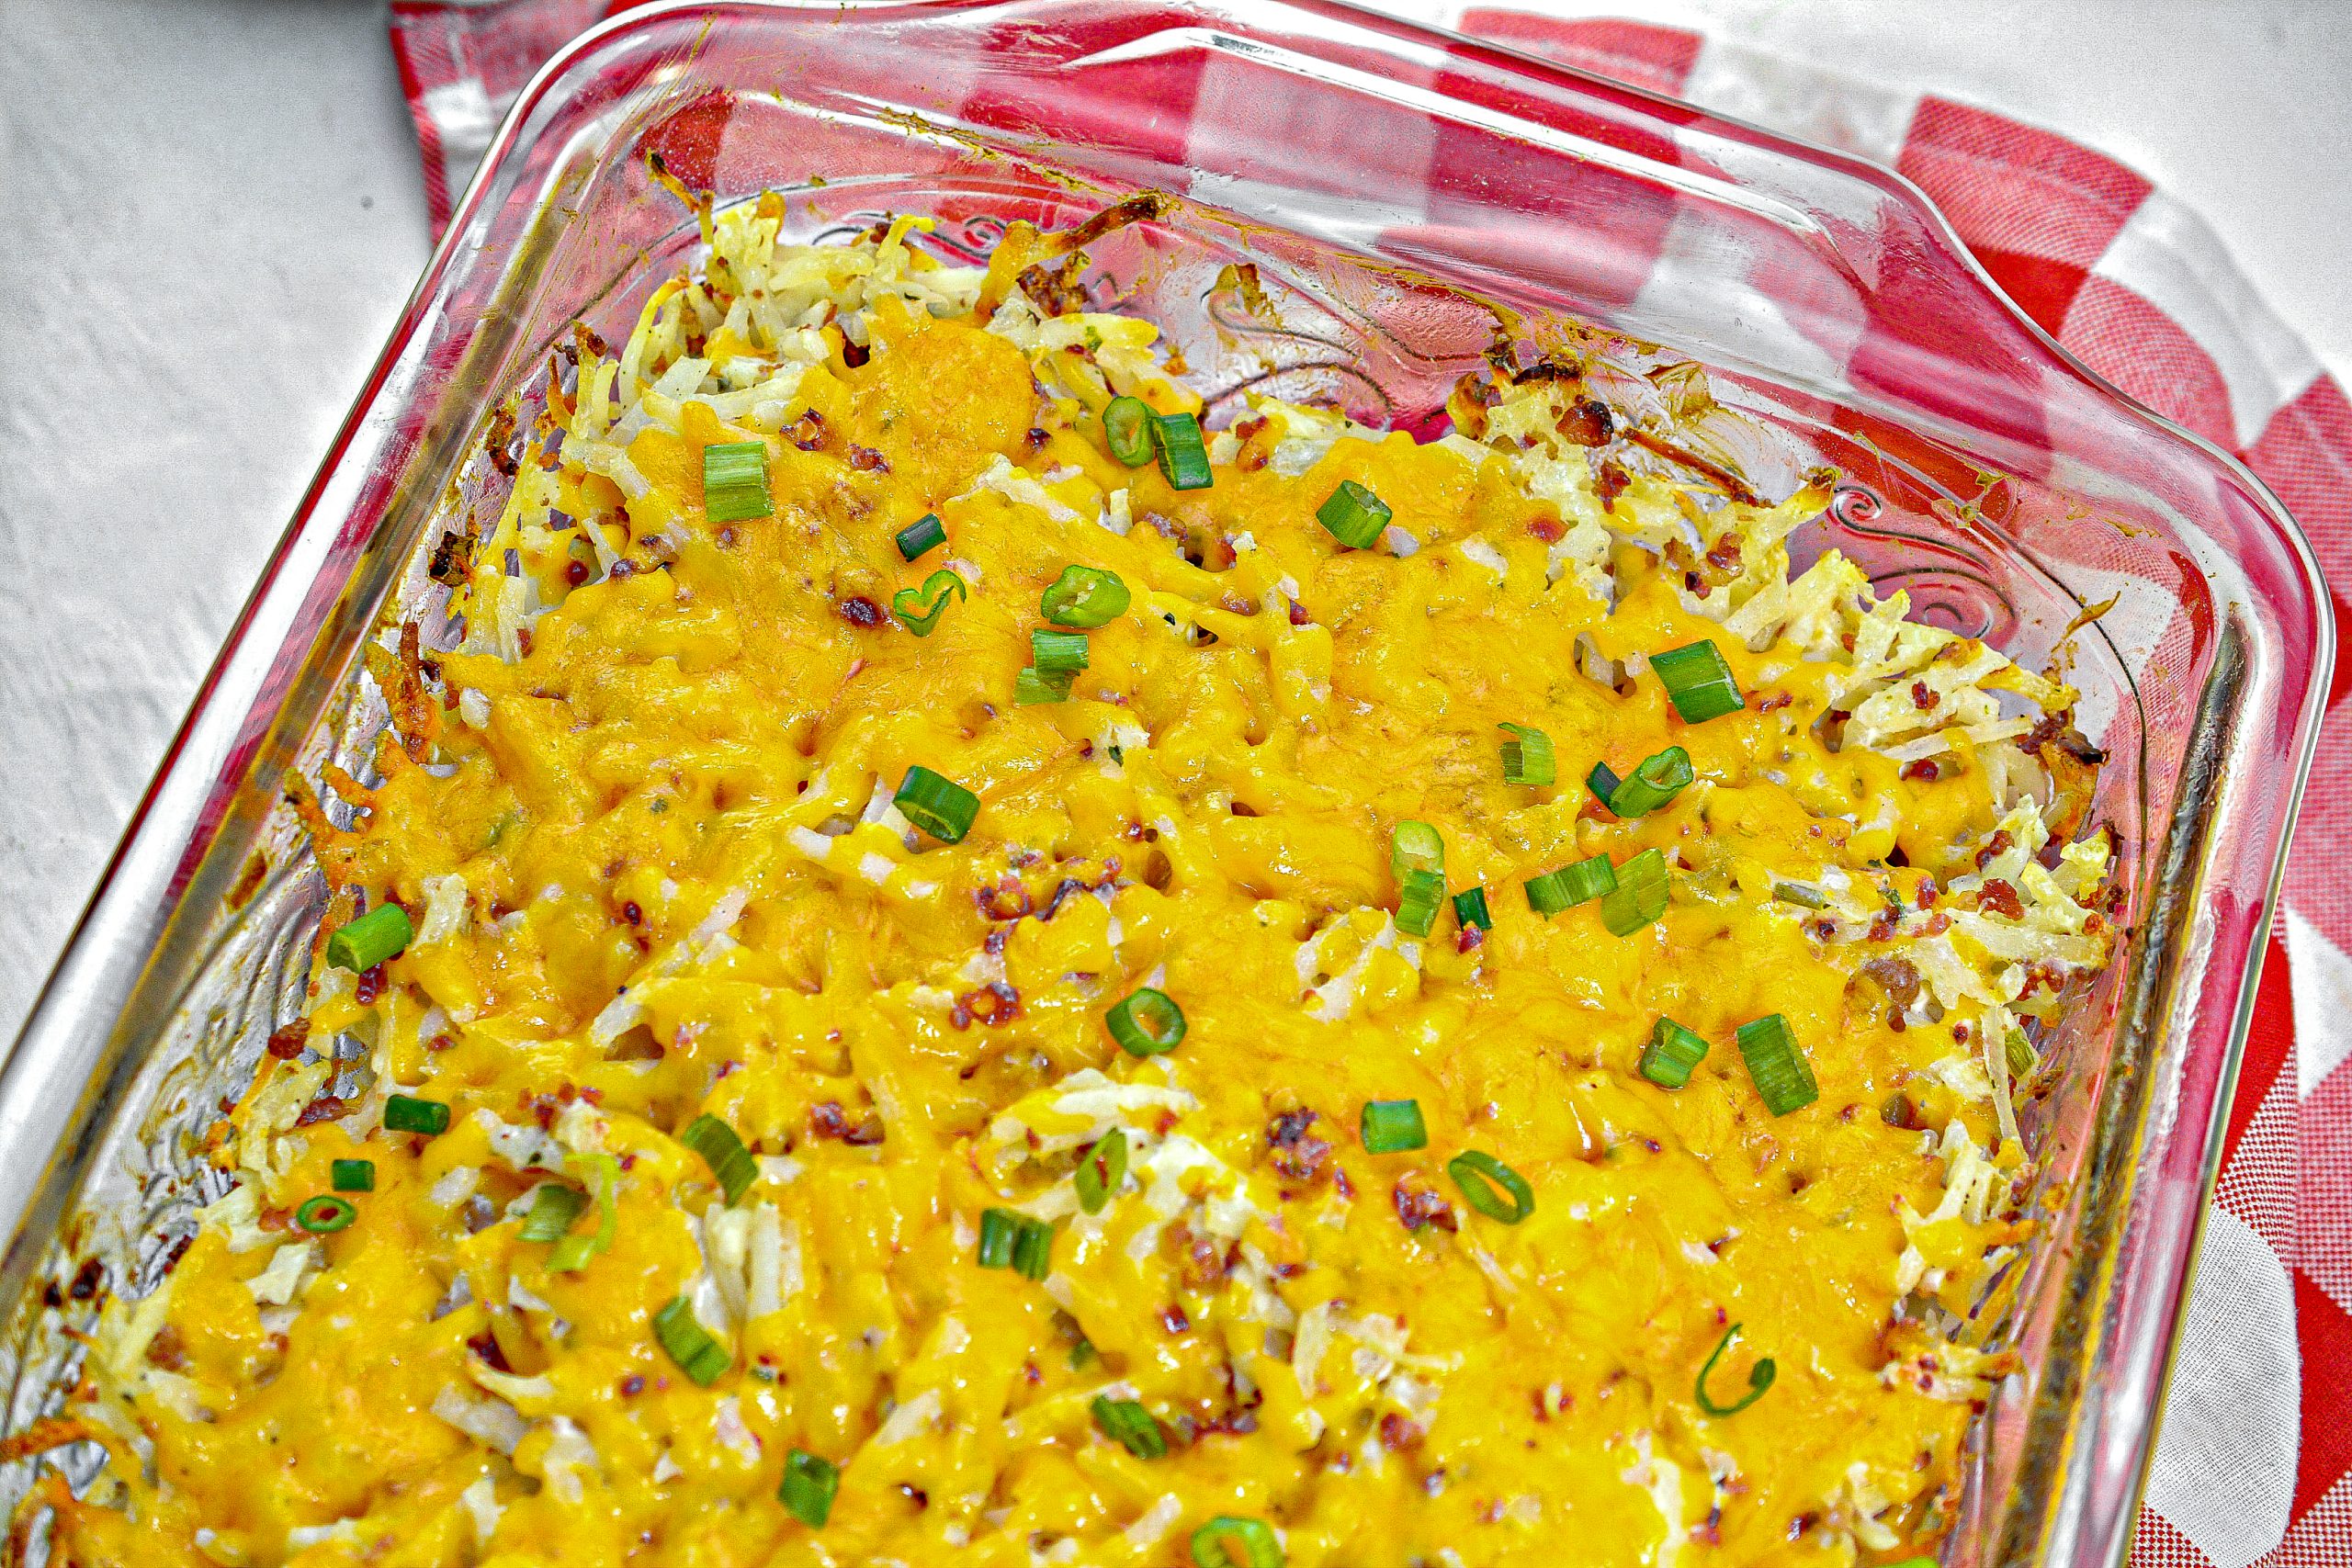 Remove the foil, add the additional cup of cheddar cheese, and bake for an additional 15 minutes before serving.